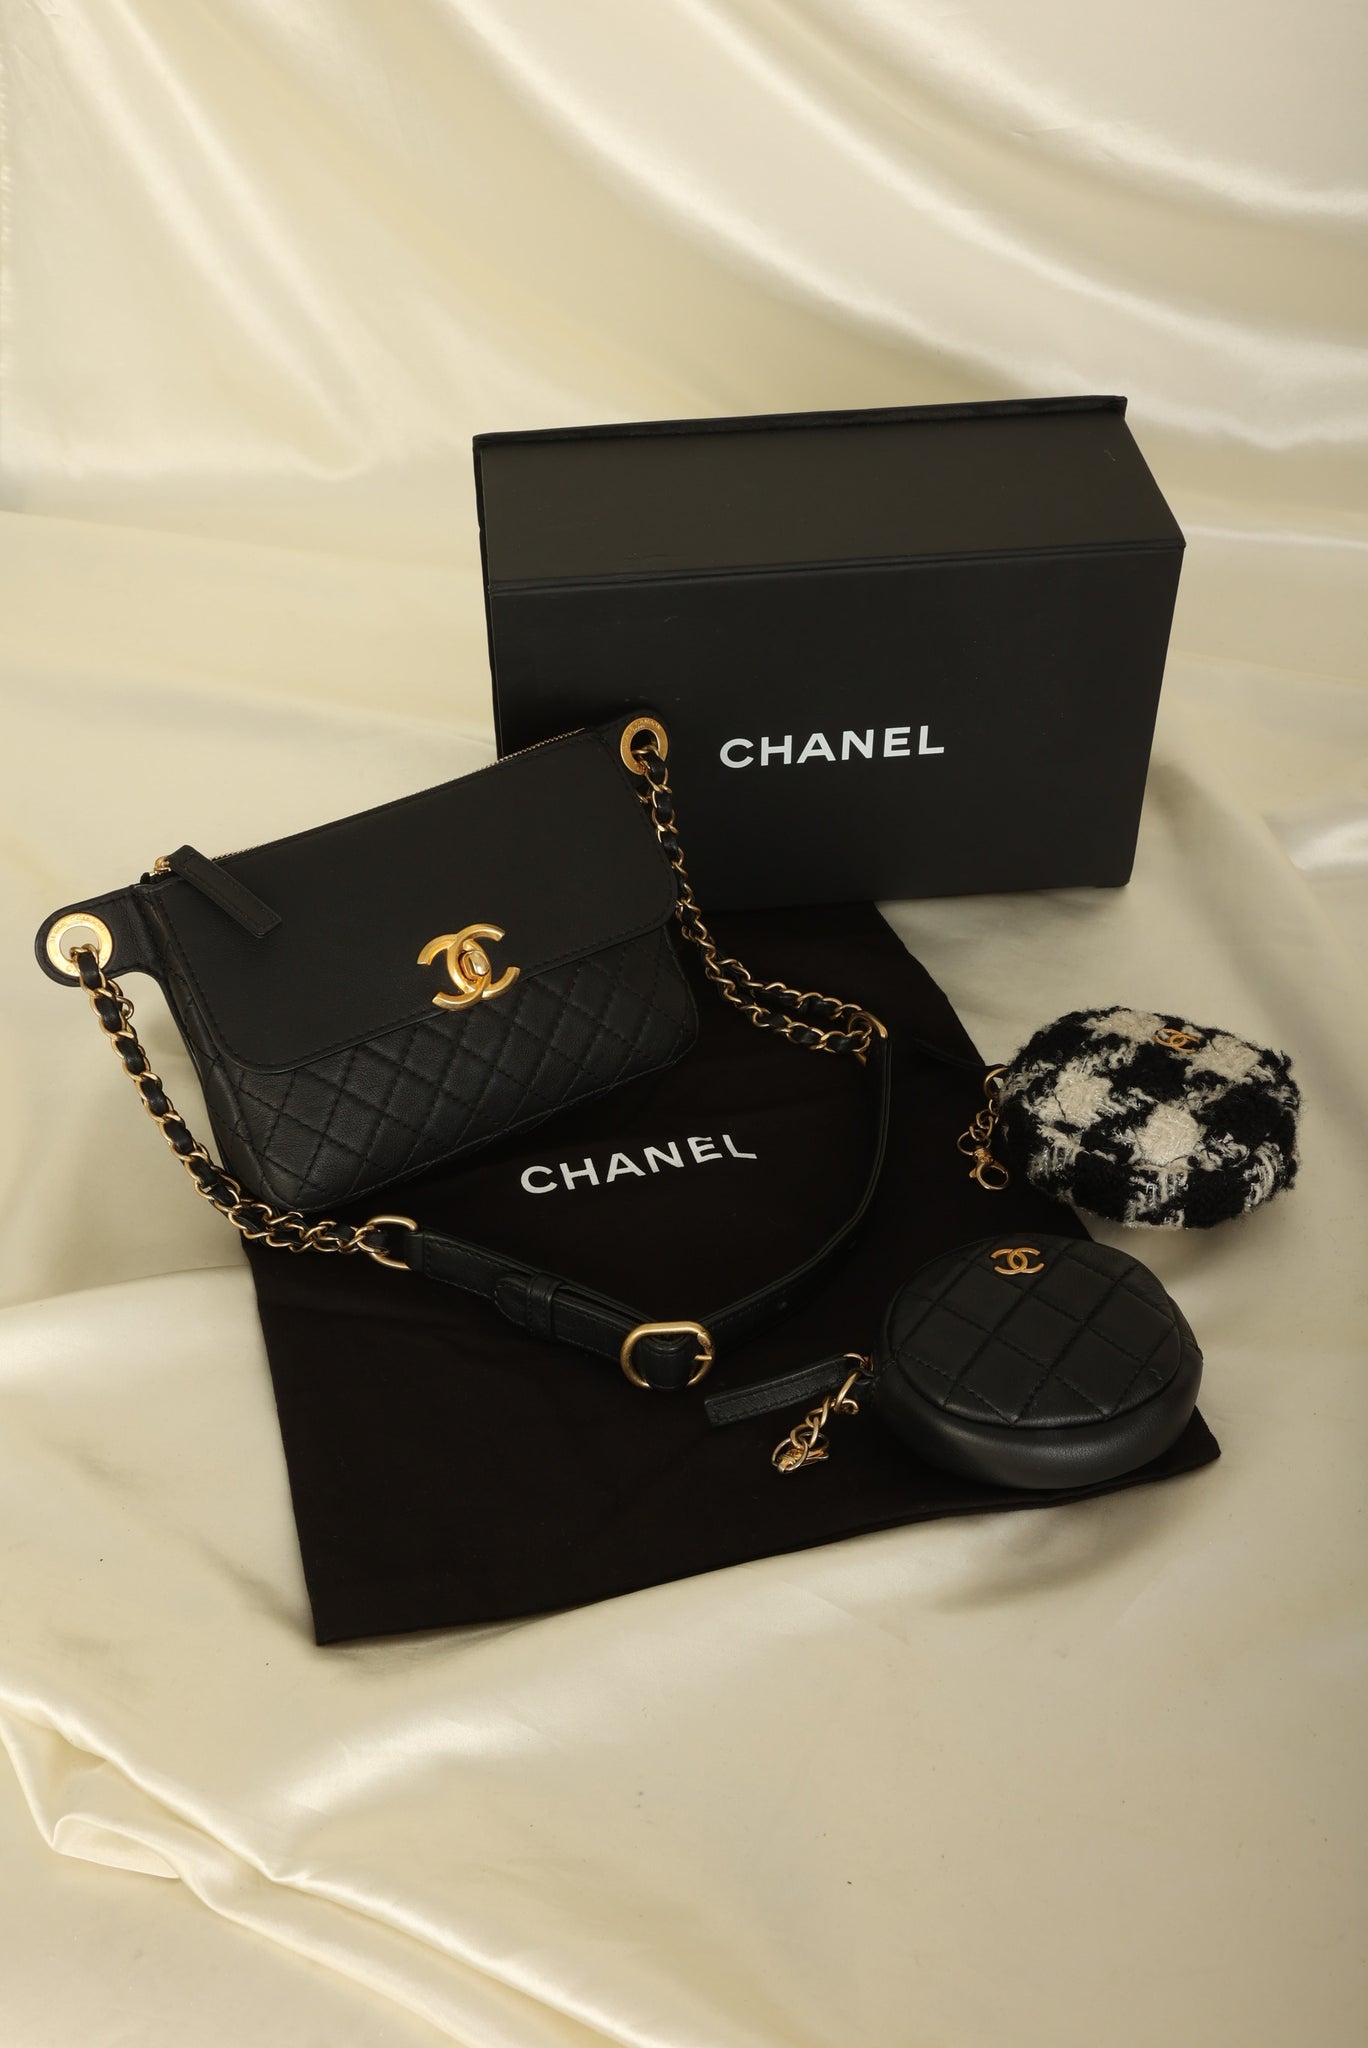 Chanel VIP  Chanel, Bags, Sling backpack